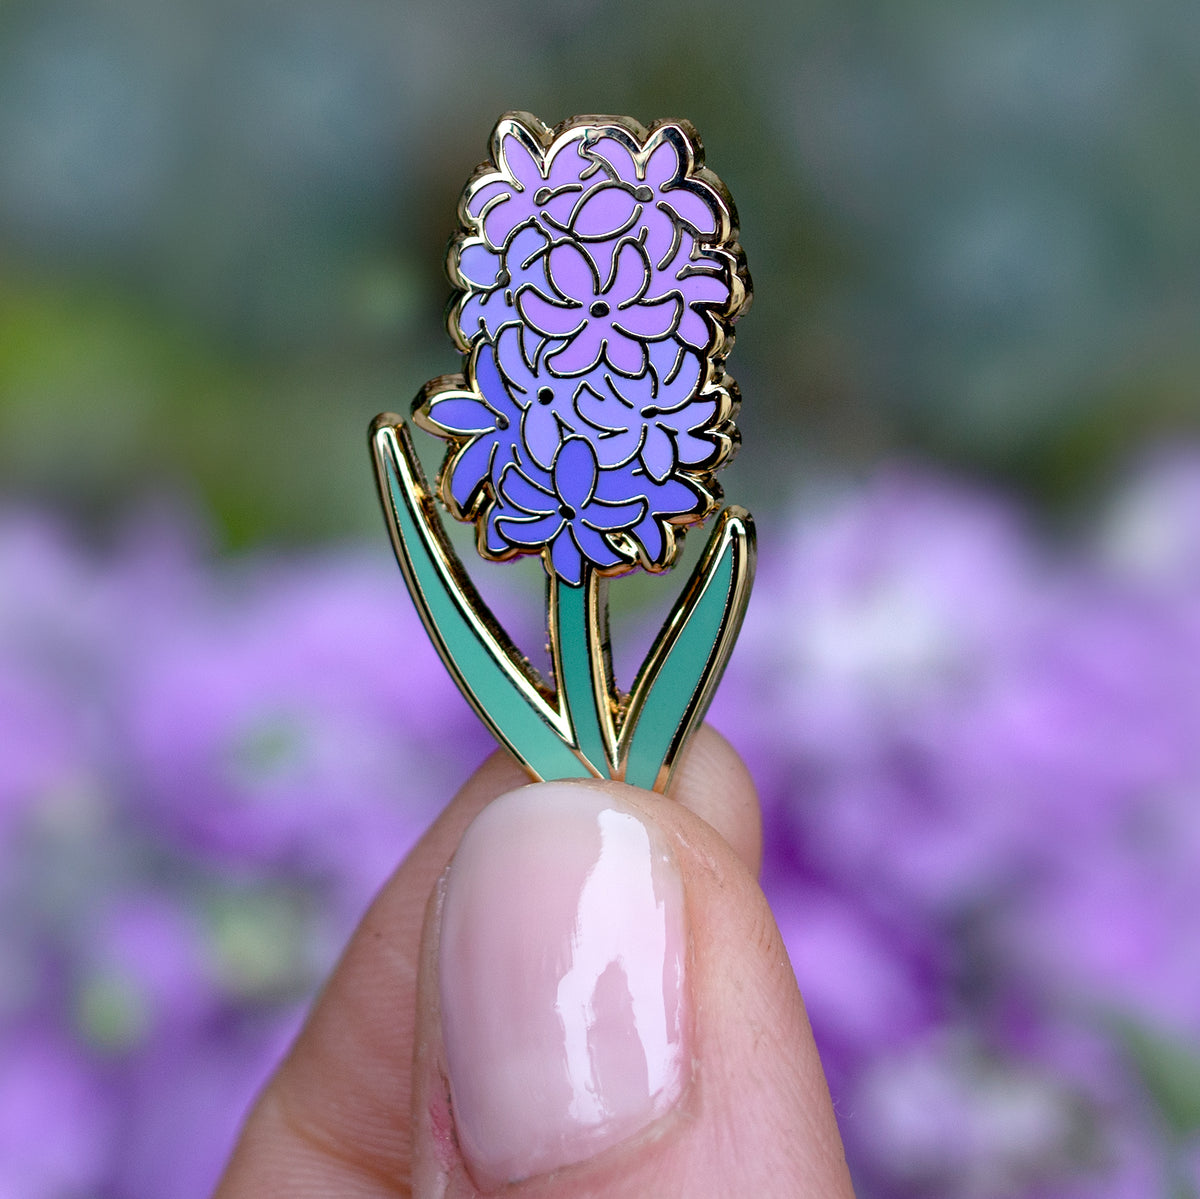 Enamel Pins - Succulents, Cacti & Plants – Botanical Bright - Add a Little  Beauty to Your Everyday